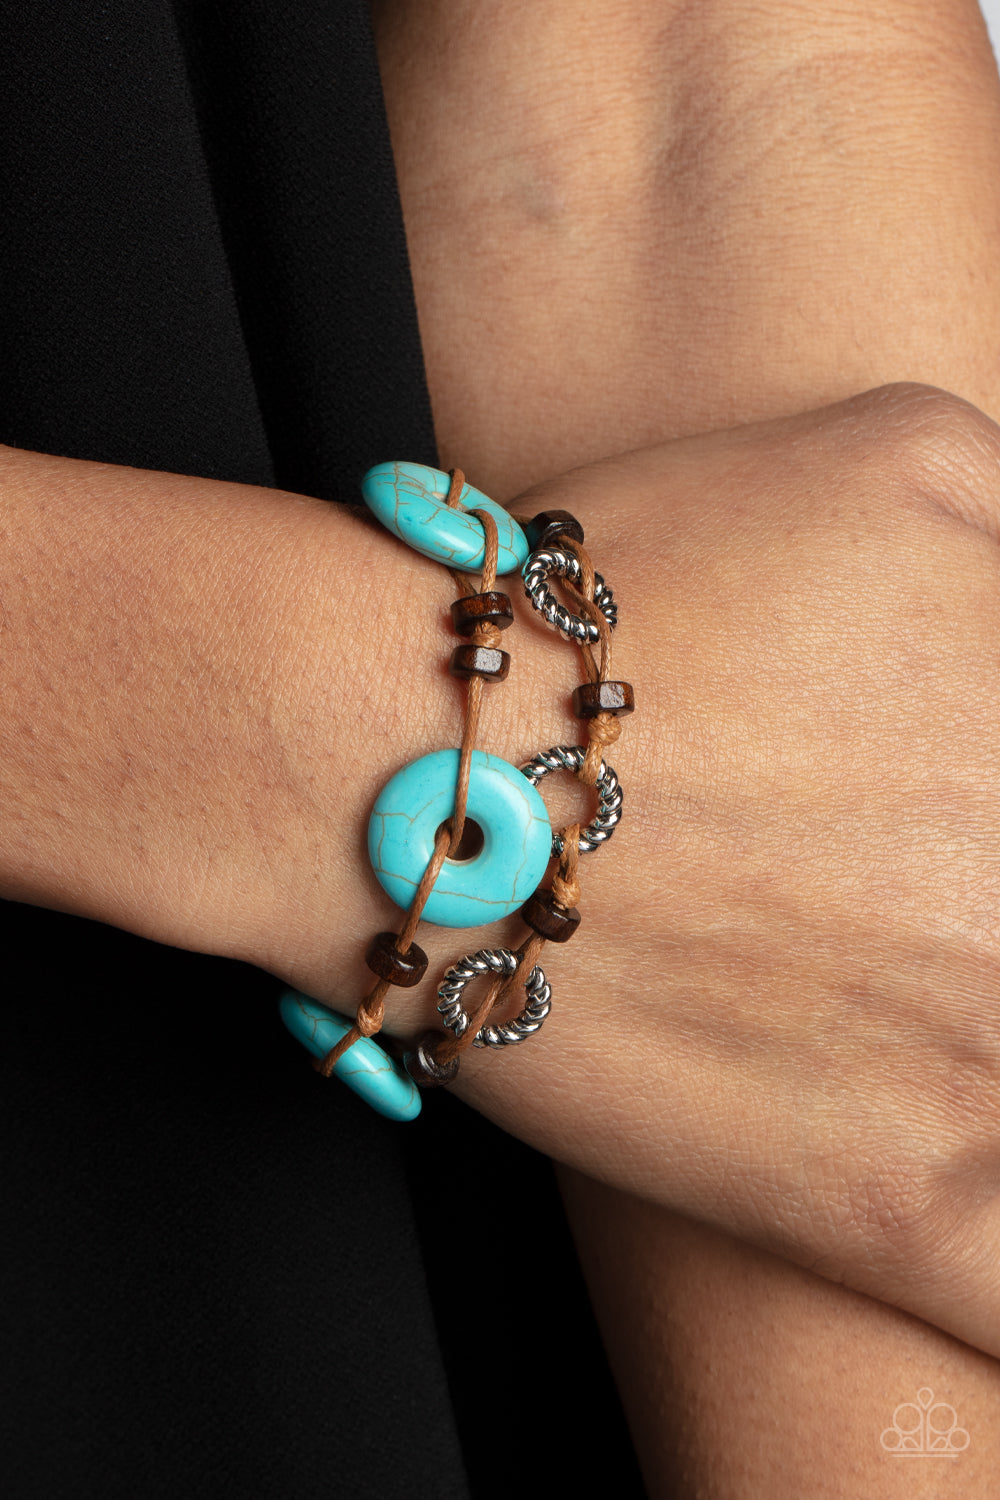 Quarry Quandary - Blue/Turquoise Stone, Wooden Beads, & Textured Silver Rings Paparazzi Bracelet